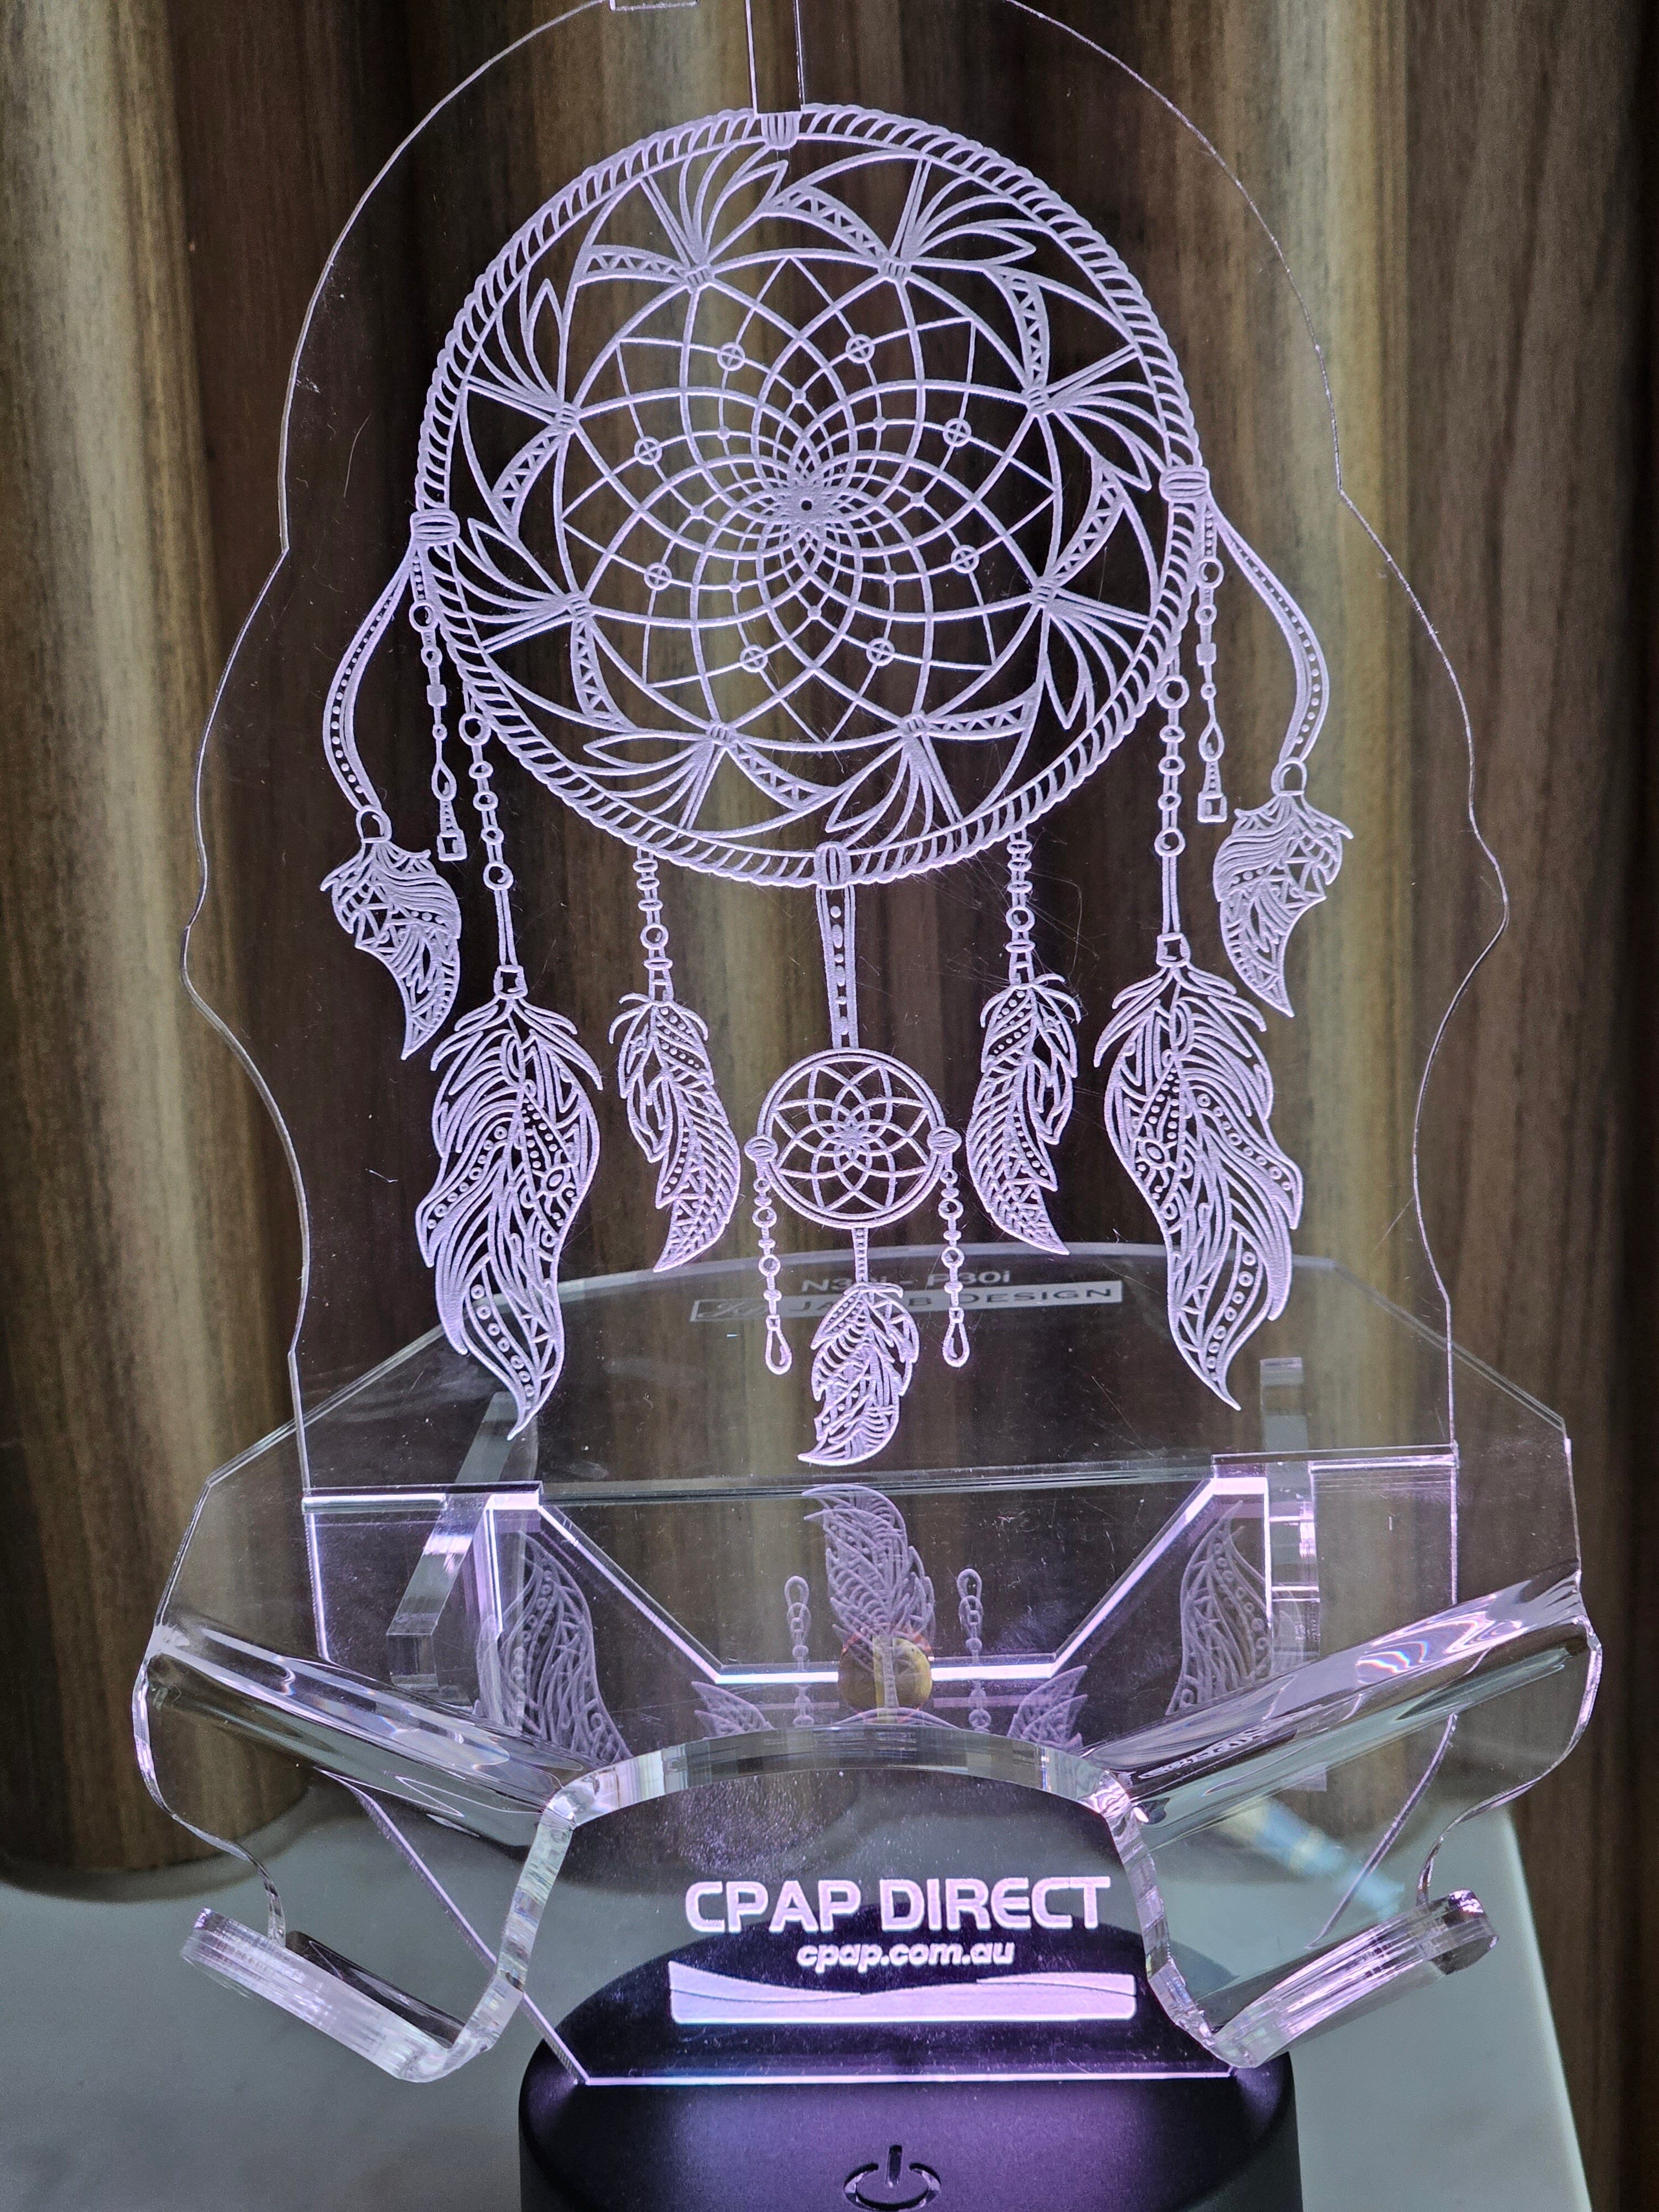 LED CPAP Mask Stand - AirFit N20 Accessories Jacab Design Dream Catcher 